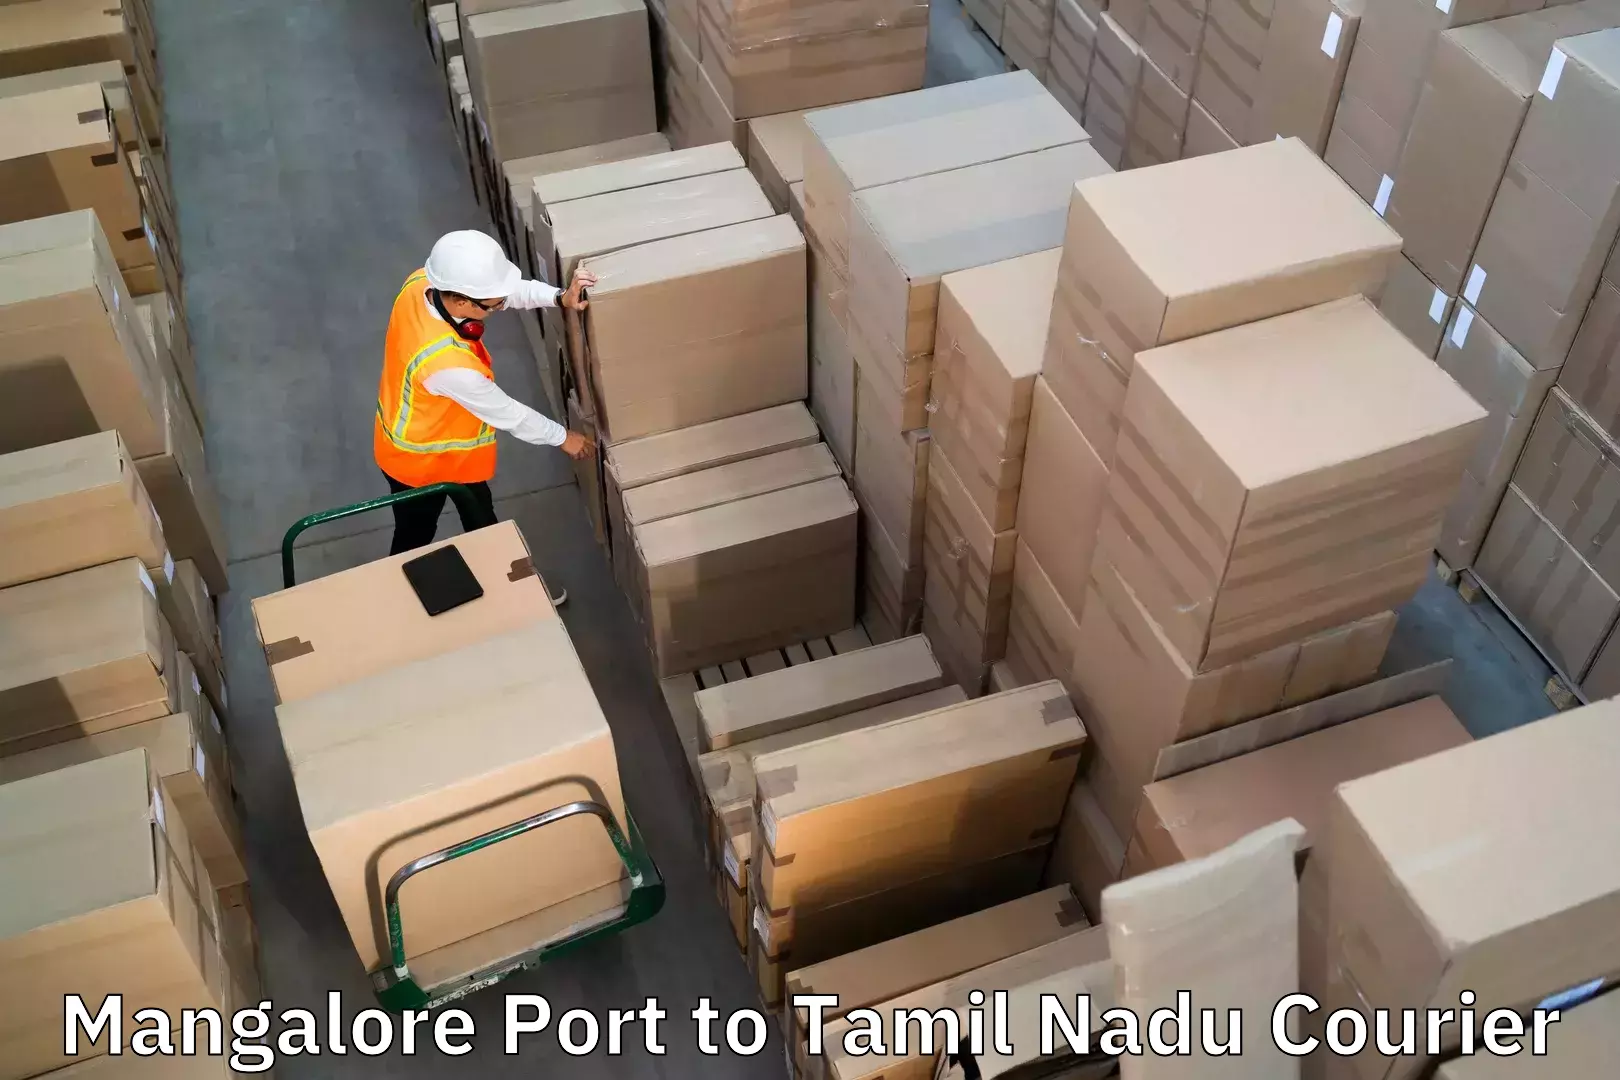 Luggage transport deals Mangalore Port to IIT Madras